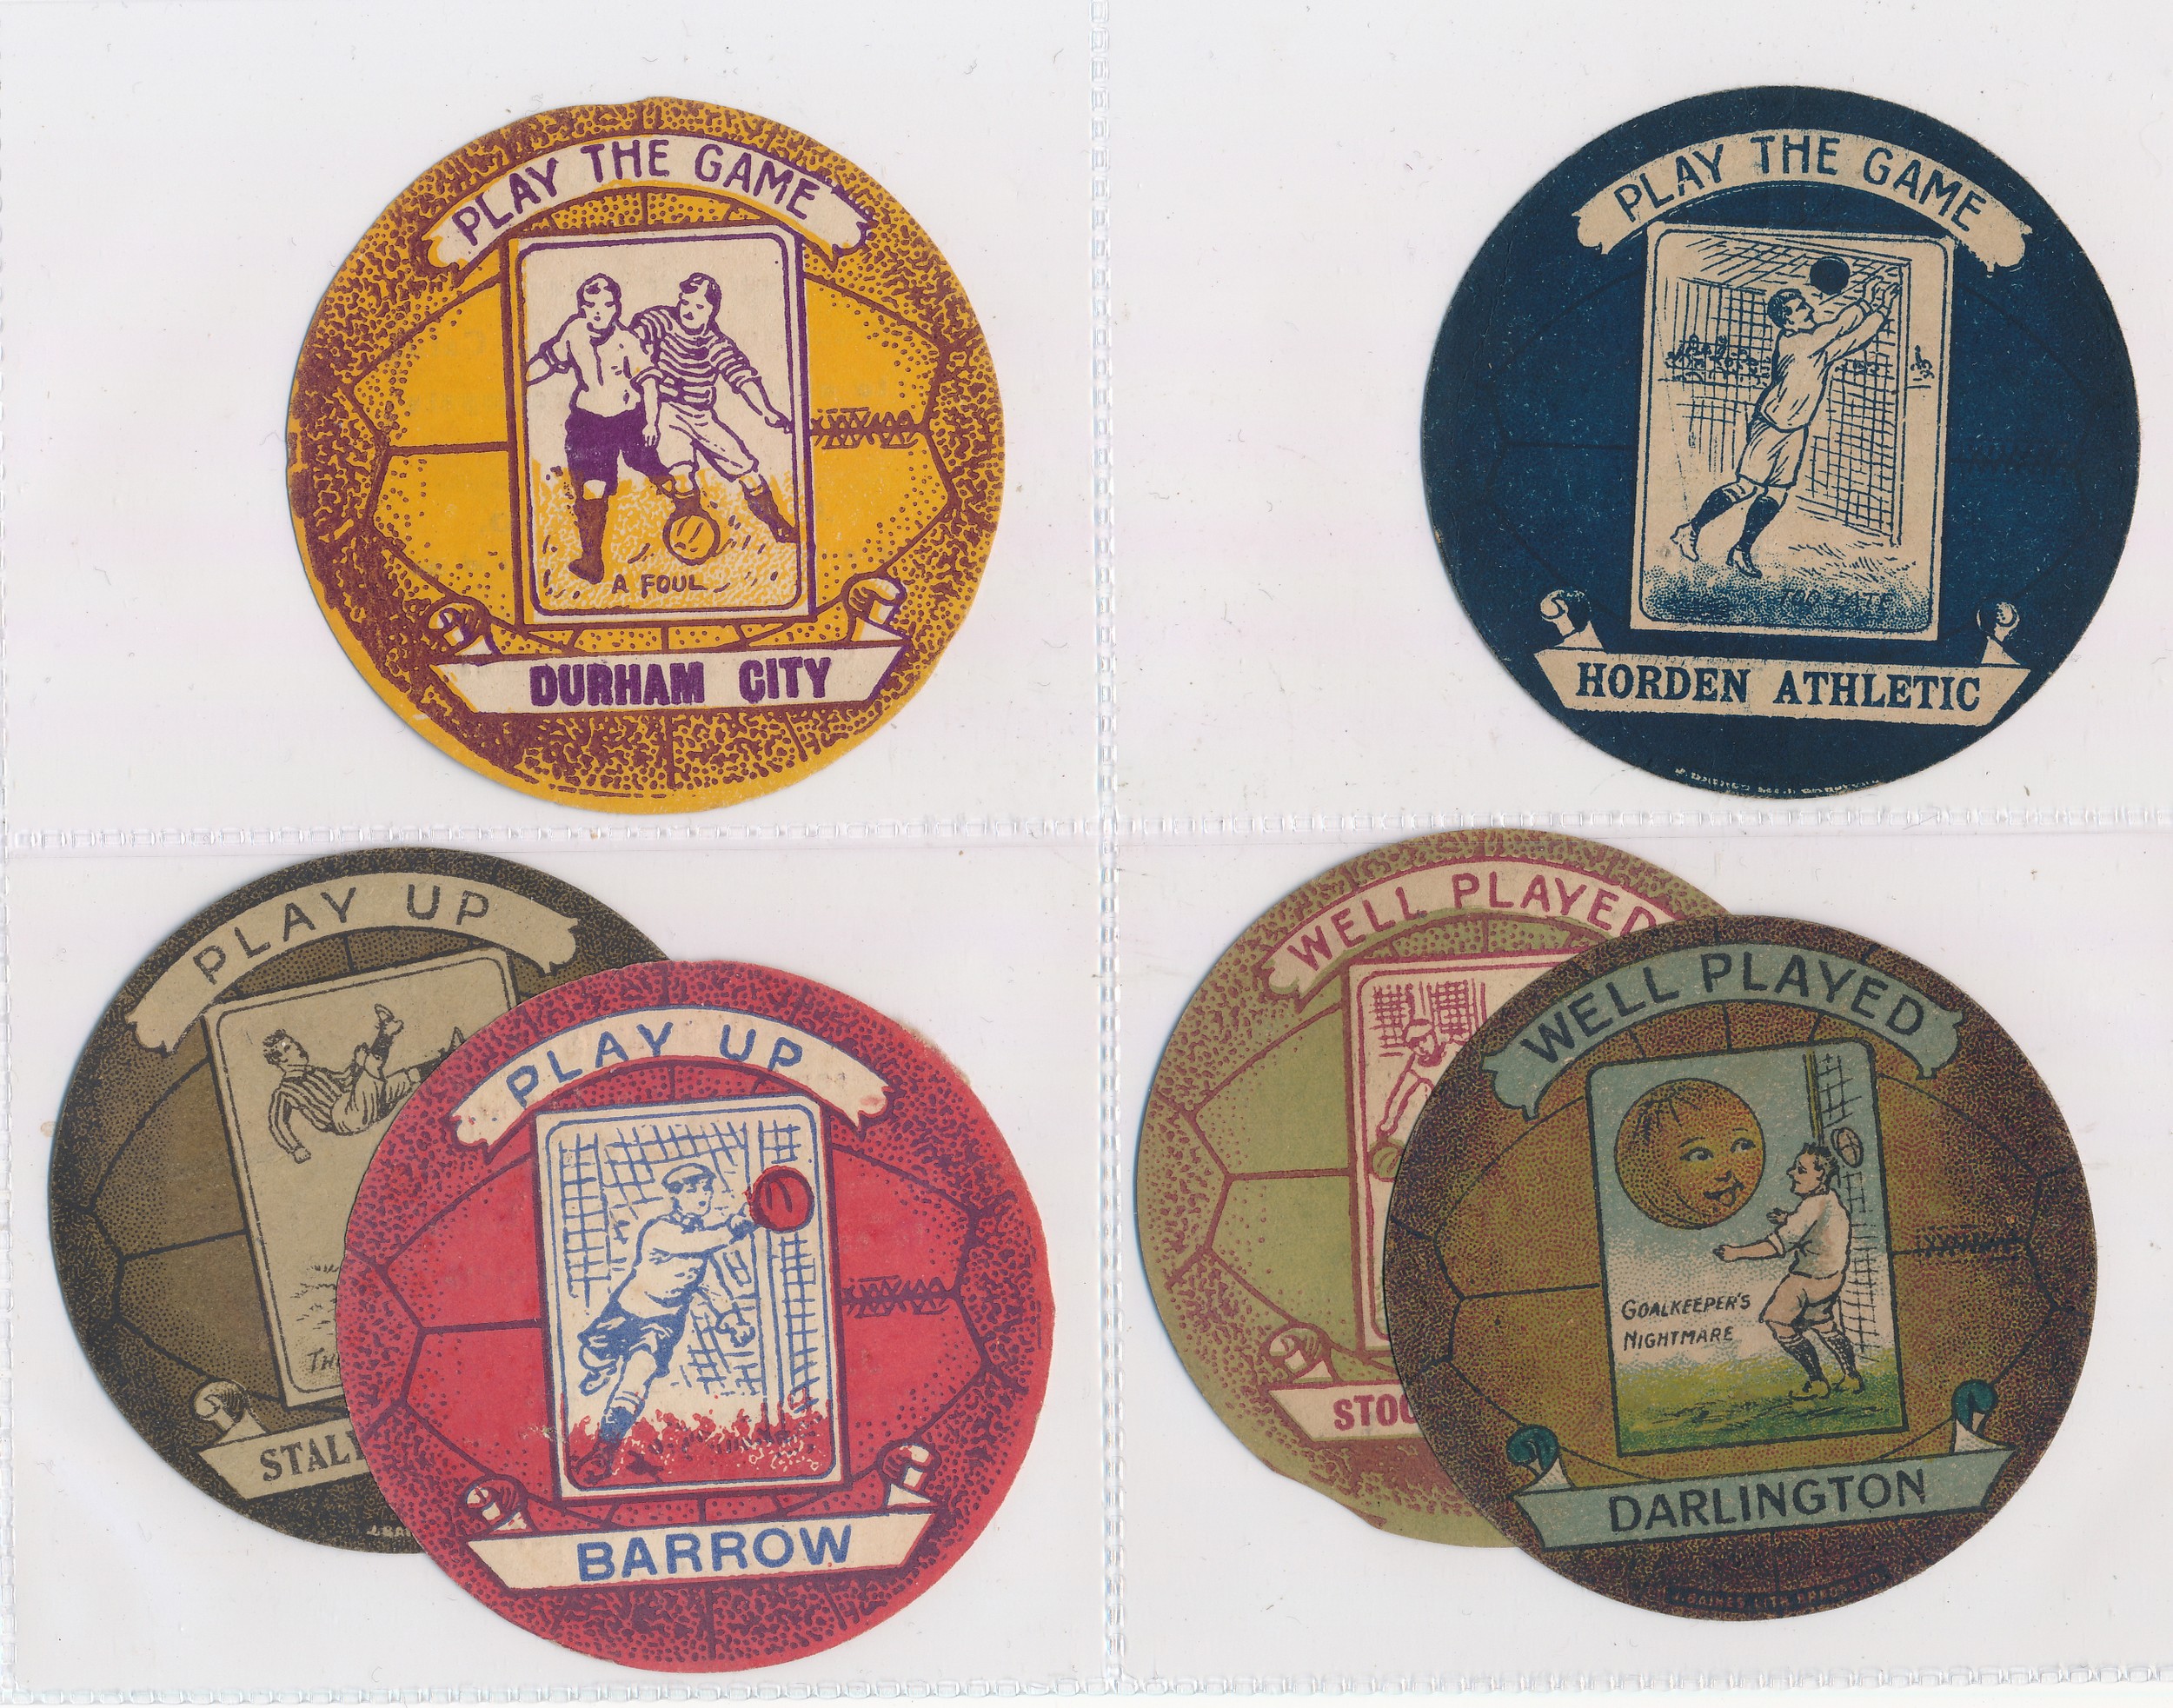 Baines trade cards, circular football shaped (6) with Durham City, Horden Athletic, Barrow,